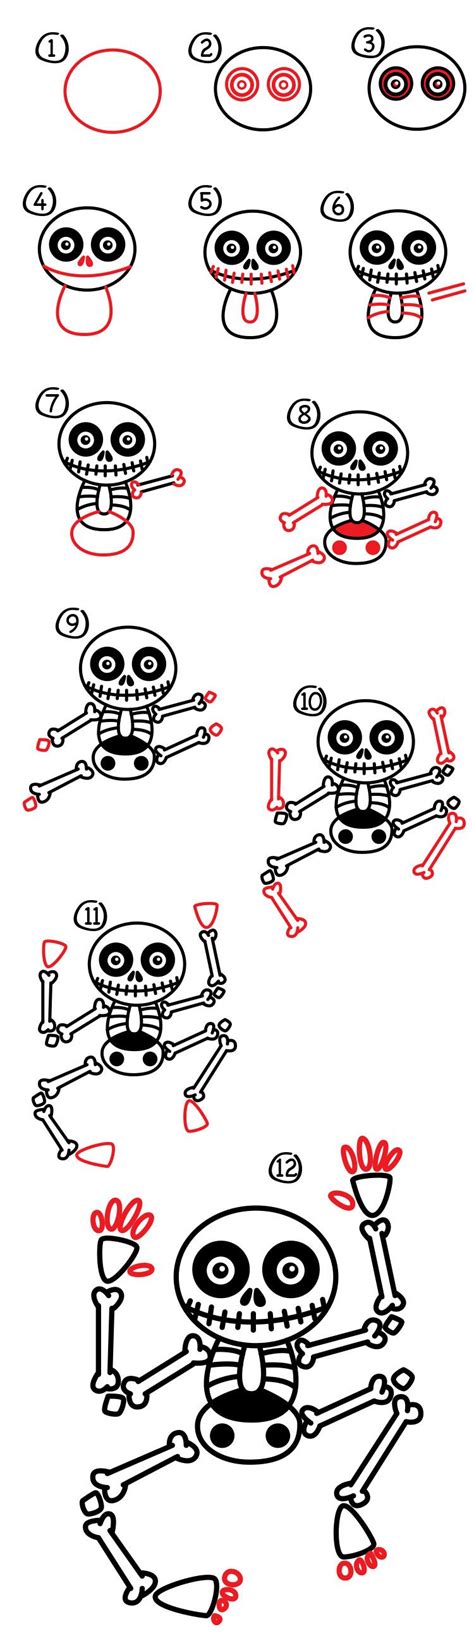 How To Draw A Skeleton Art For Kids Hub Easy Halloween Drawings